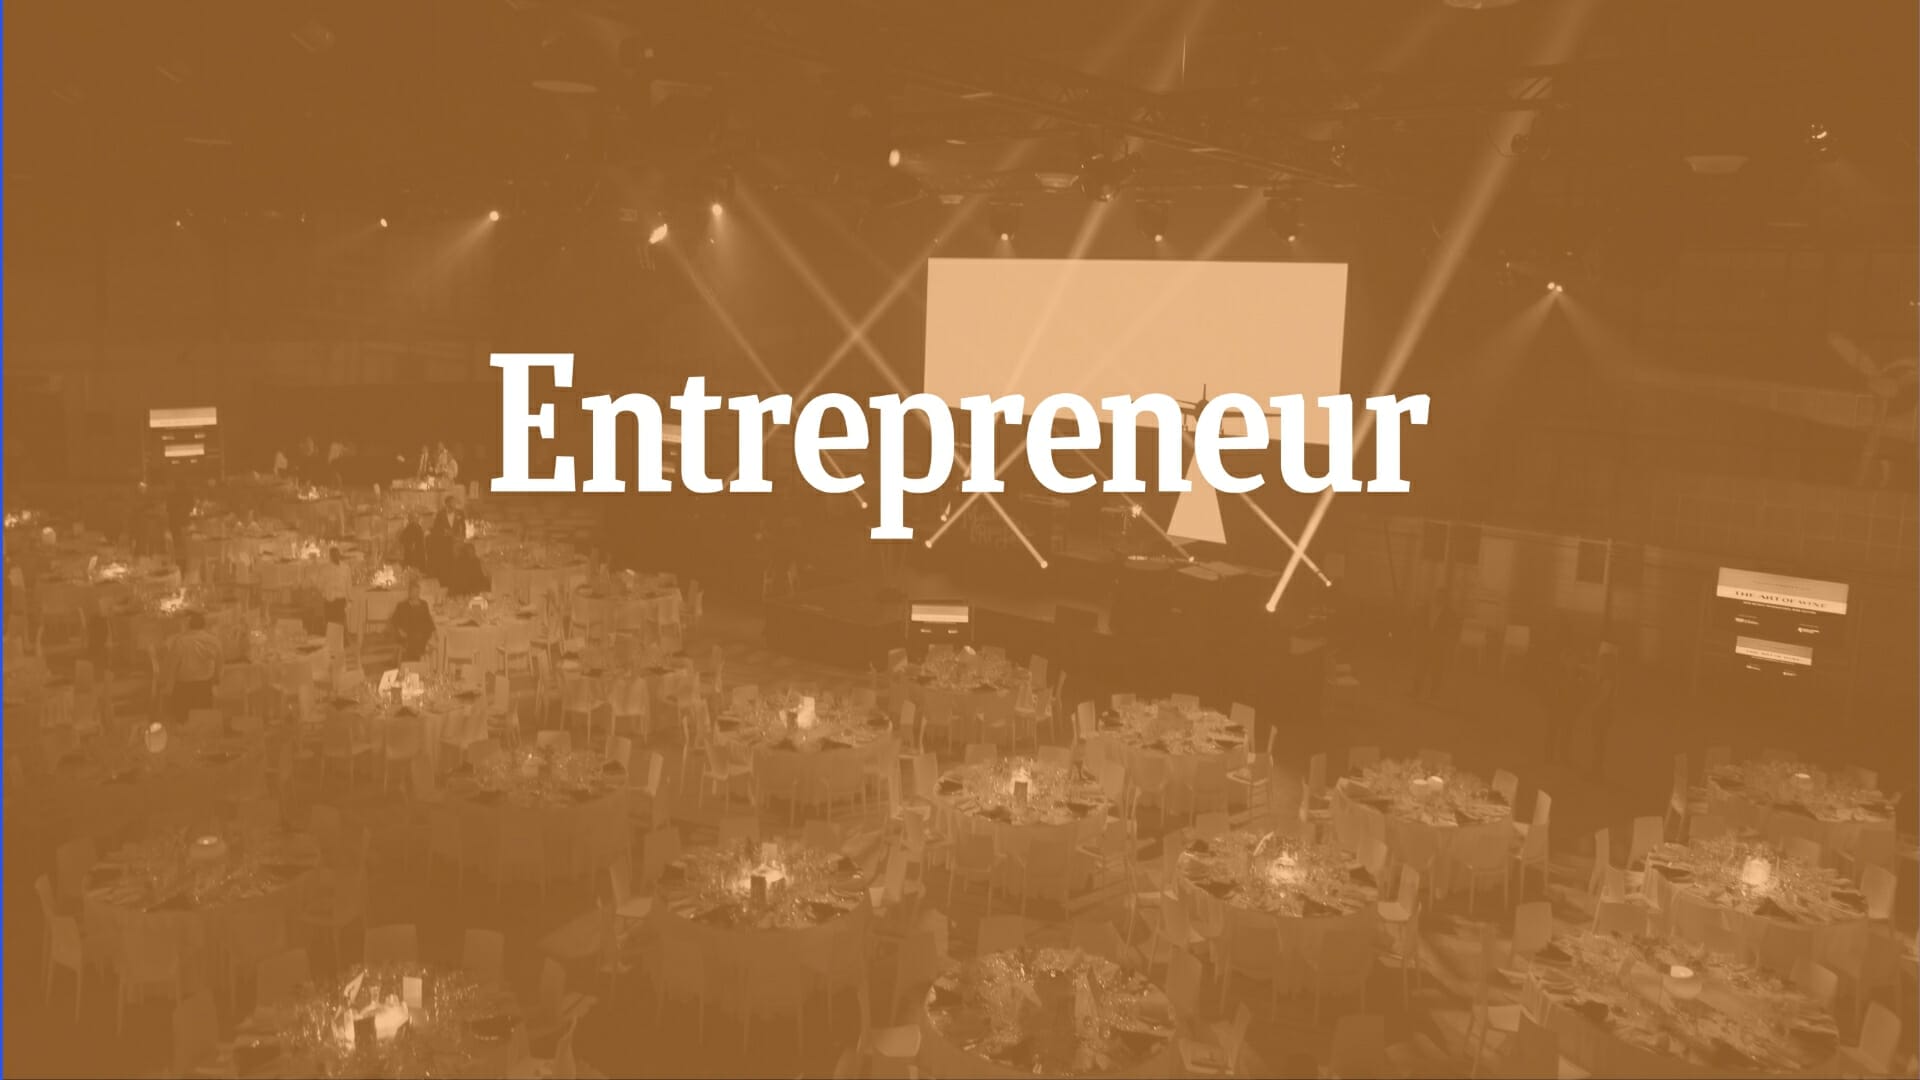 Entrepreneurs, Here Are the 5 Ways to Throw the Best First Event Ever